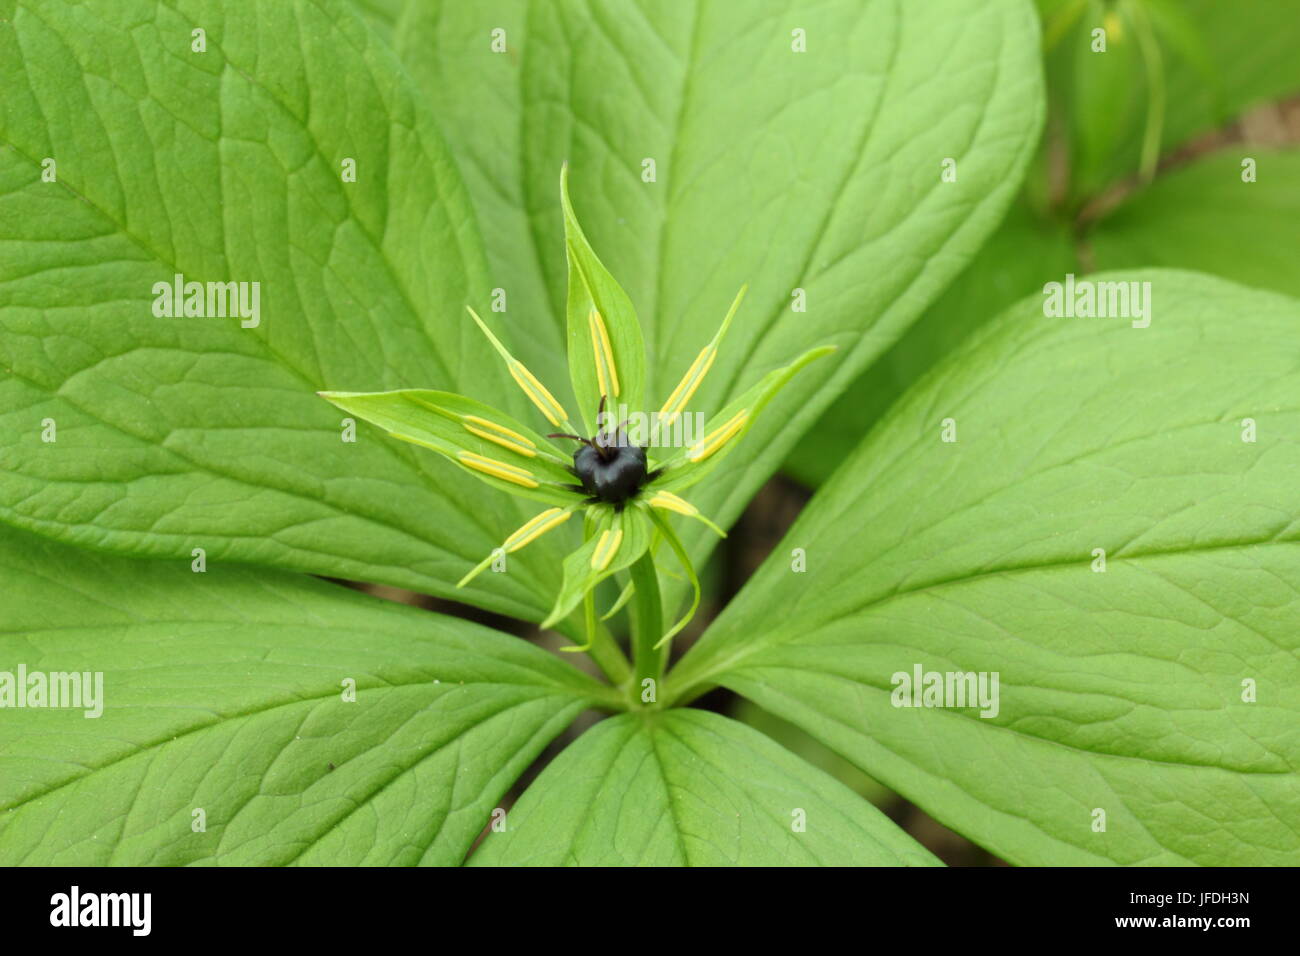 Paris Quadrifolia, a woodland plant, also called Herb Paris, displays its single berry above four distinctive leaves in a UK garden in spring Stock Photo